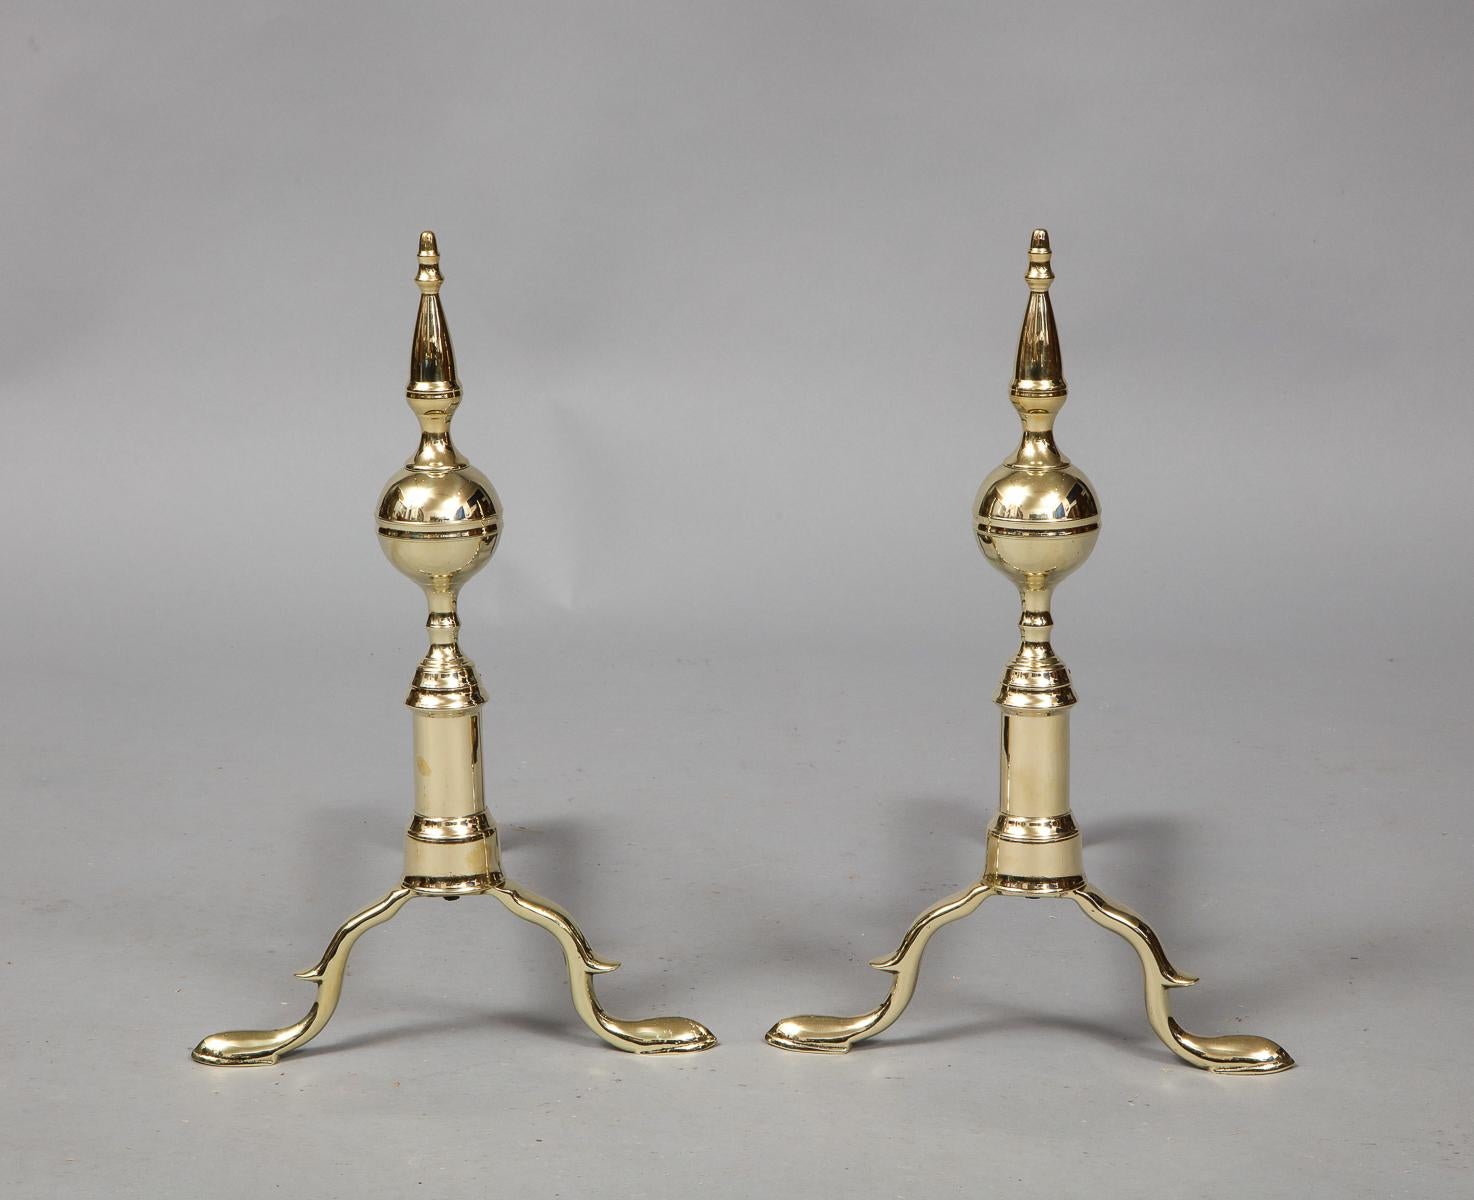 Good pair of brass andirons with steeple tops over ringed ball centres and standing on balustrade shafts with spurred slipper feet.